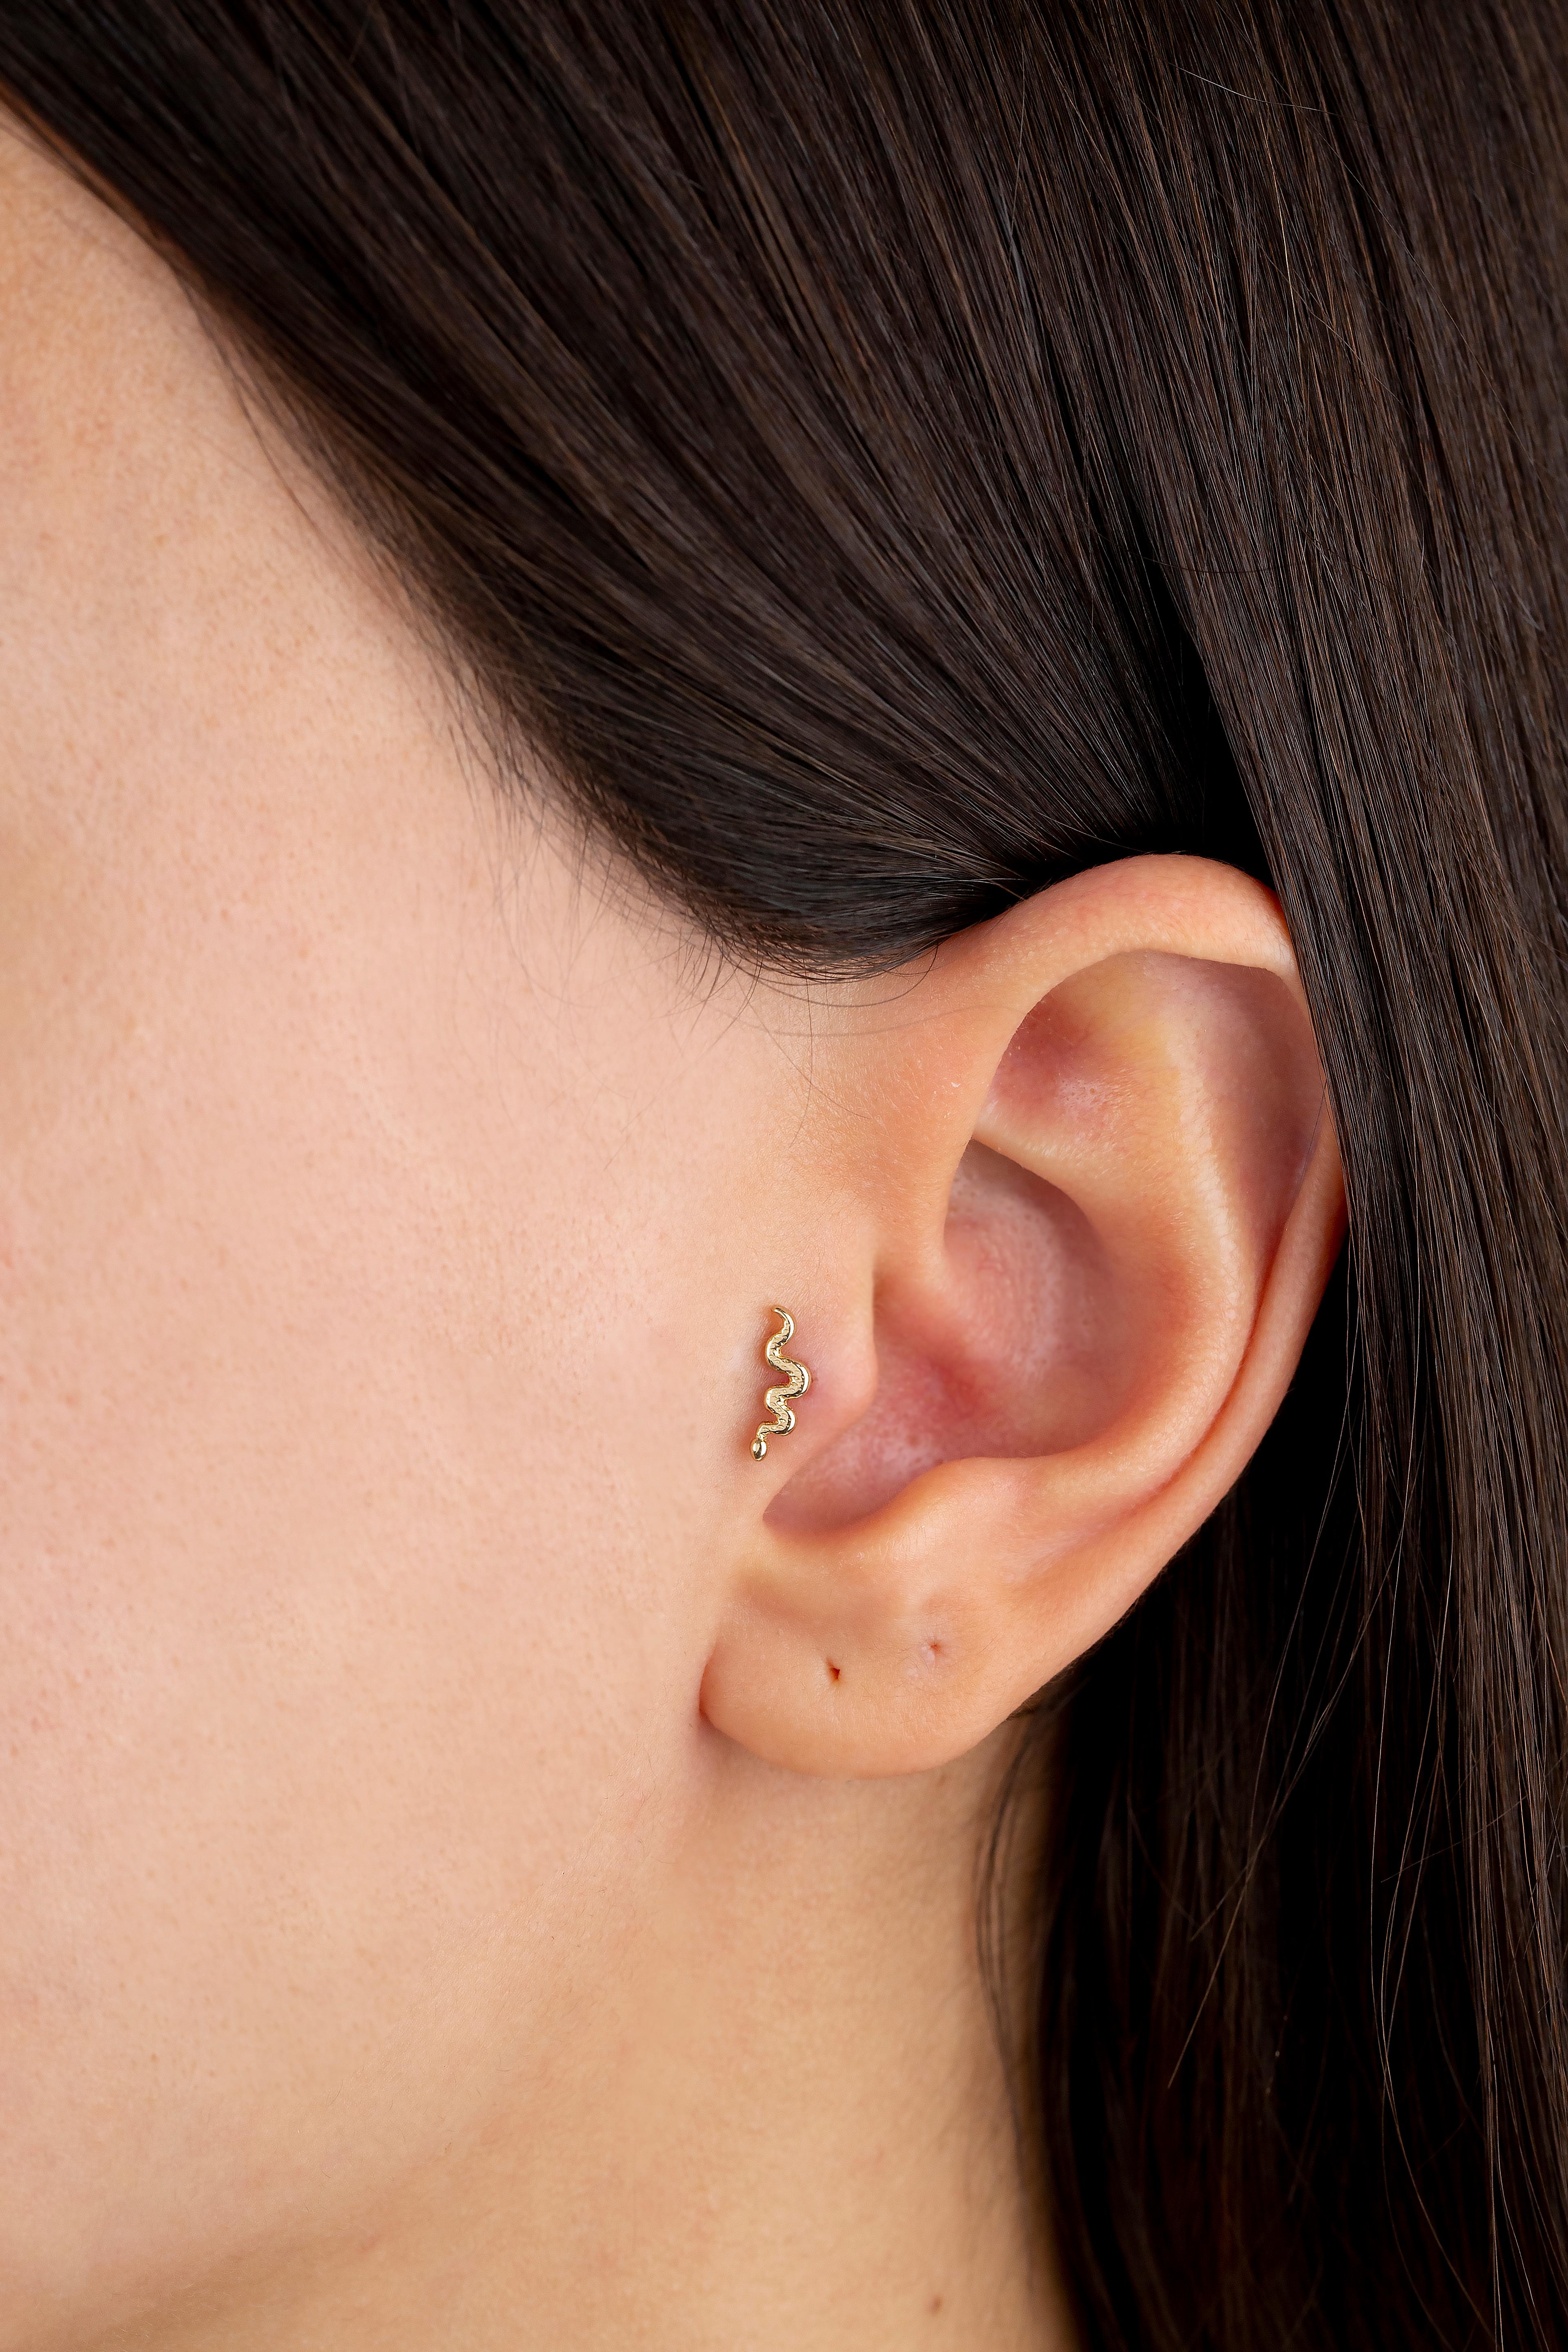 14K Gold Snake Piercing, Gold Stud Snake Earring

You can use the piercing as an earring too! Also this piercing is suitable for tragus, nose, helix, lobe, flat, medusa, monreo, labret and stud.

This piercing was made with quality materials and